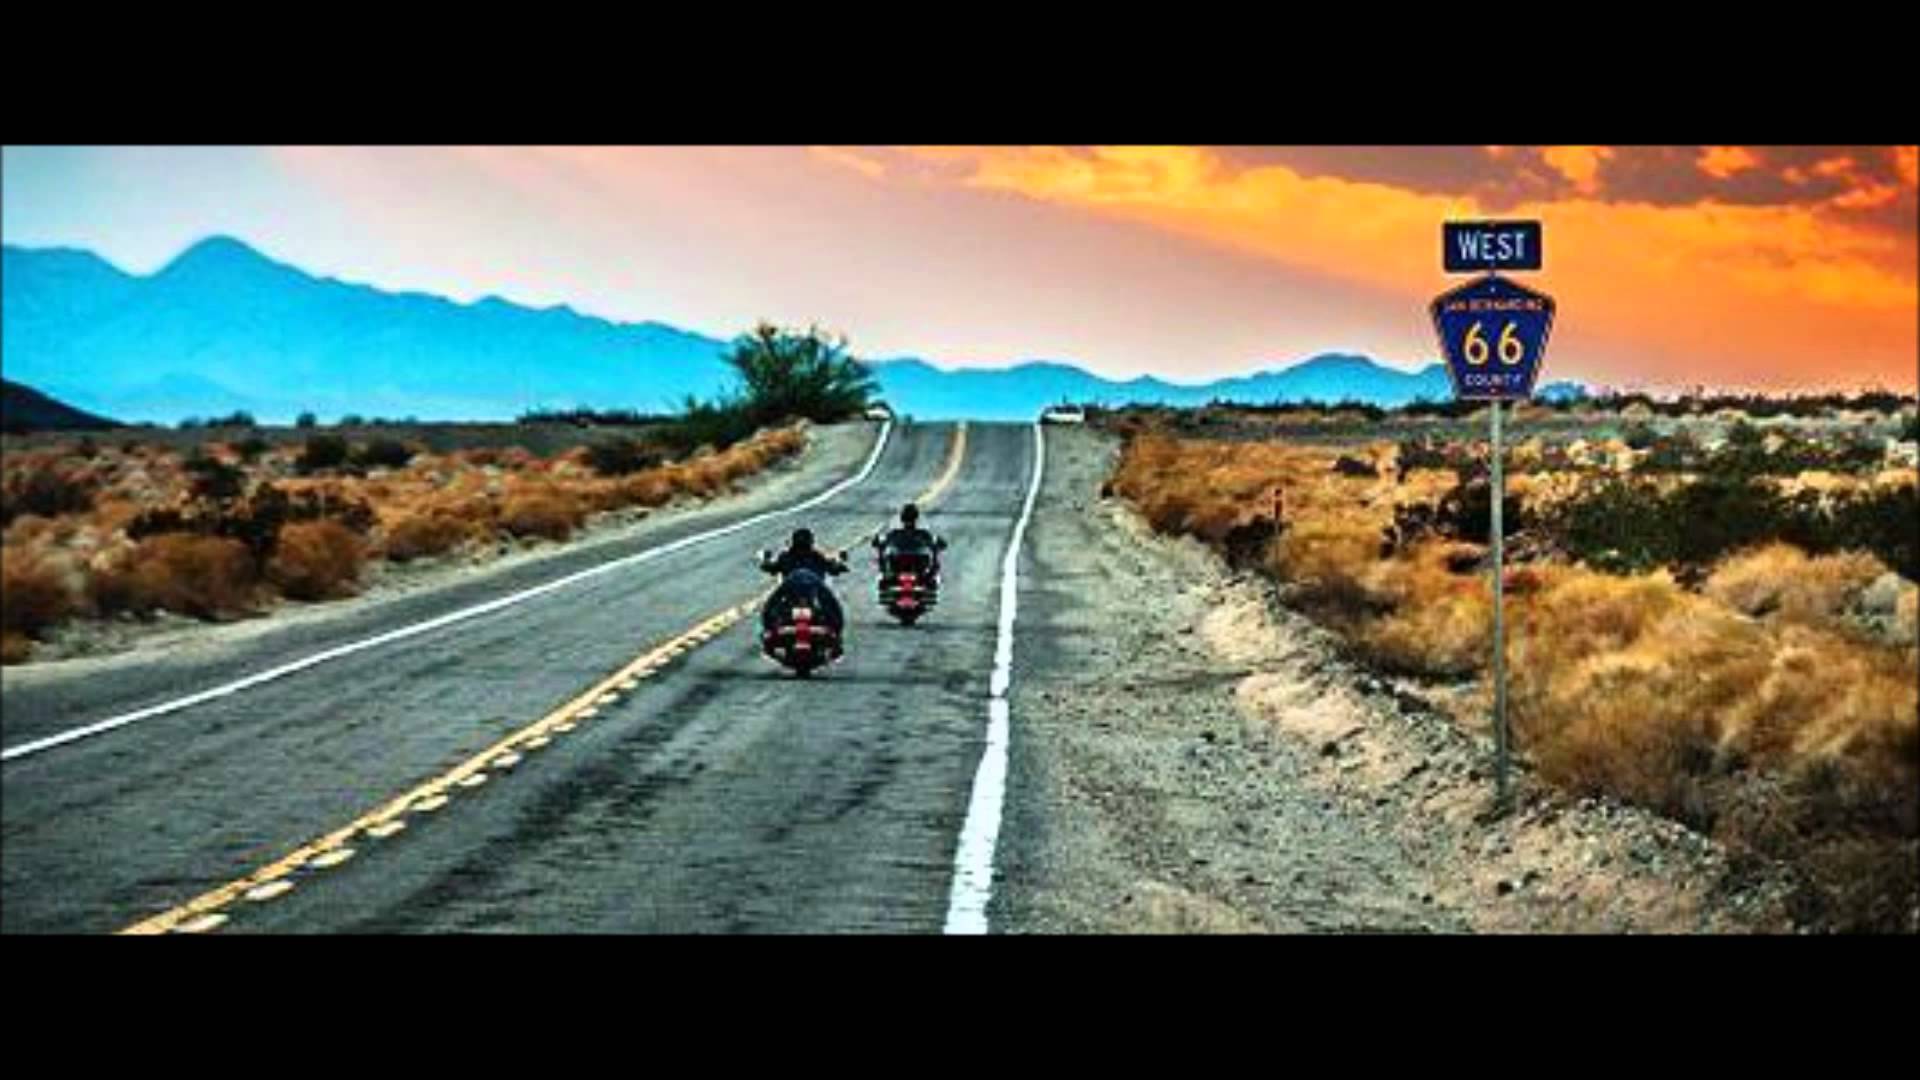 Download Route 66 wallpapers for mobile phone free Route 66 HD pictures